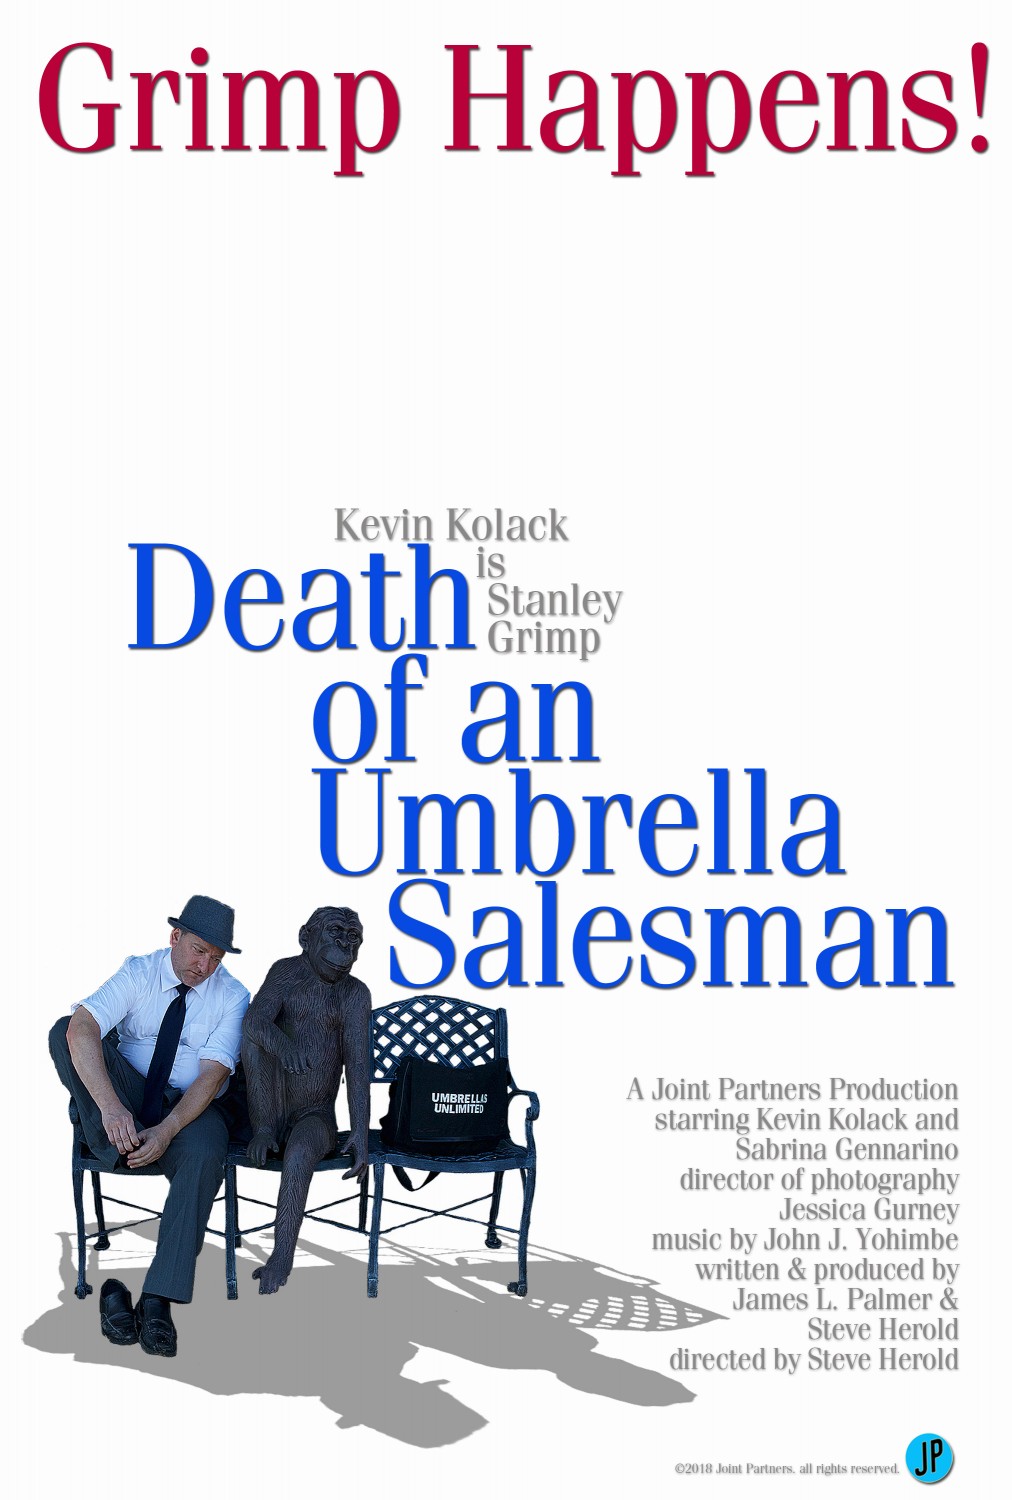 Extra Large Movie Poster Image for Death of an Umbrella Salesman